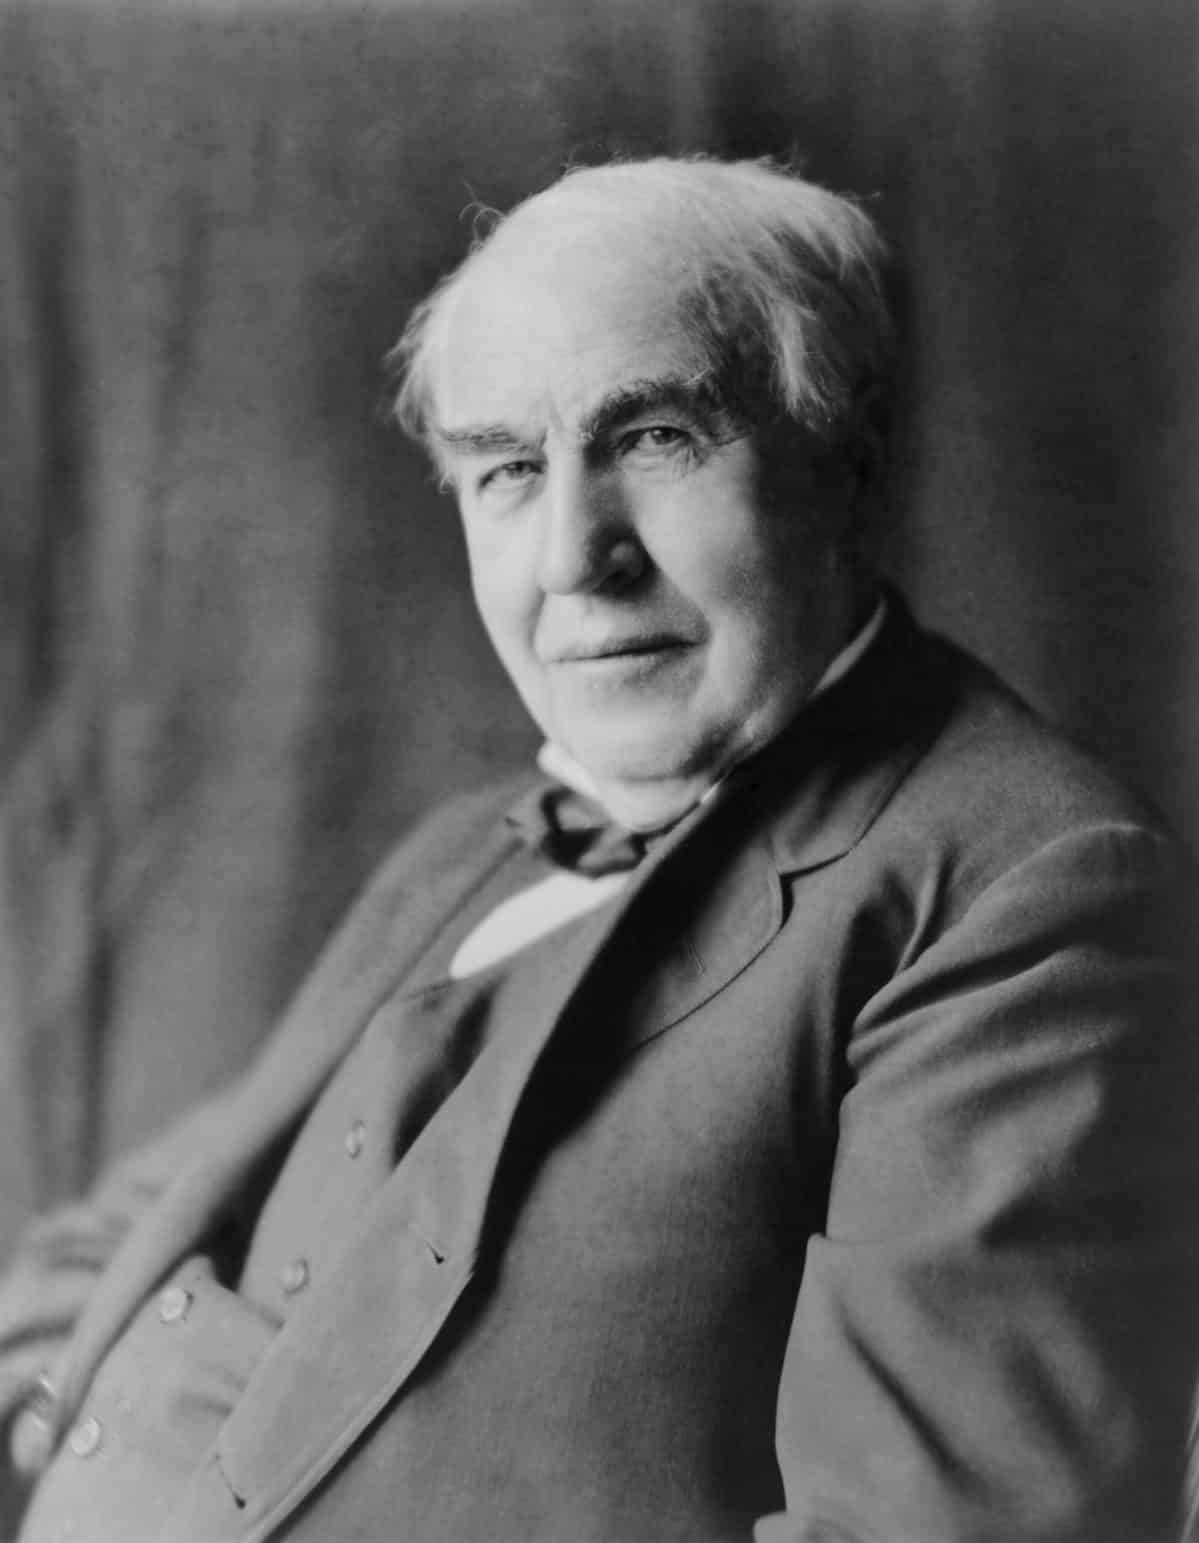 A black-and-white portrait of Thomas Edison. He is facing the left side of the frame that he is looking forward. He is an older man with male pattern baldness and scraggly gray hair though his bushy eyebrows appear somewhat brown. He is wearing a three-piece charcoal suit the jacket is open but the vest is buttoned. He is a bit on the rotund side. He’s got a Mona Lisa smile.